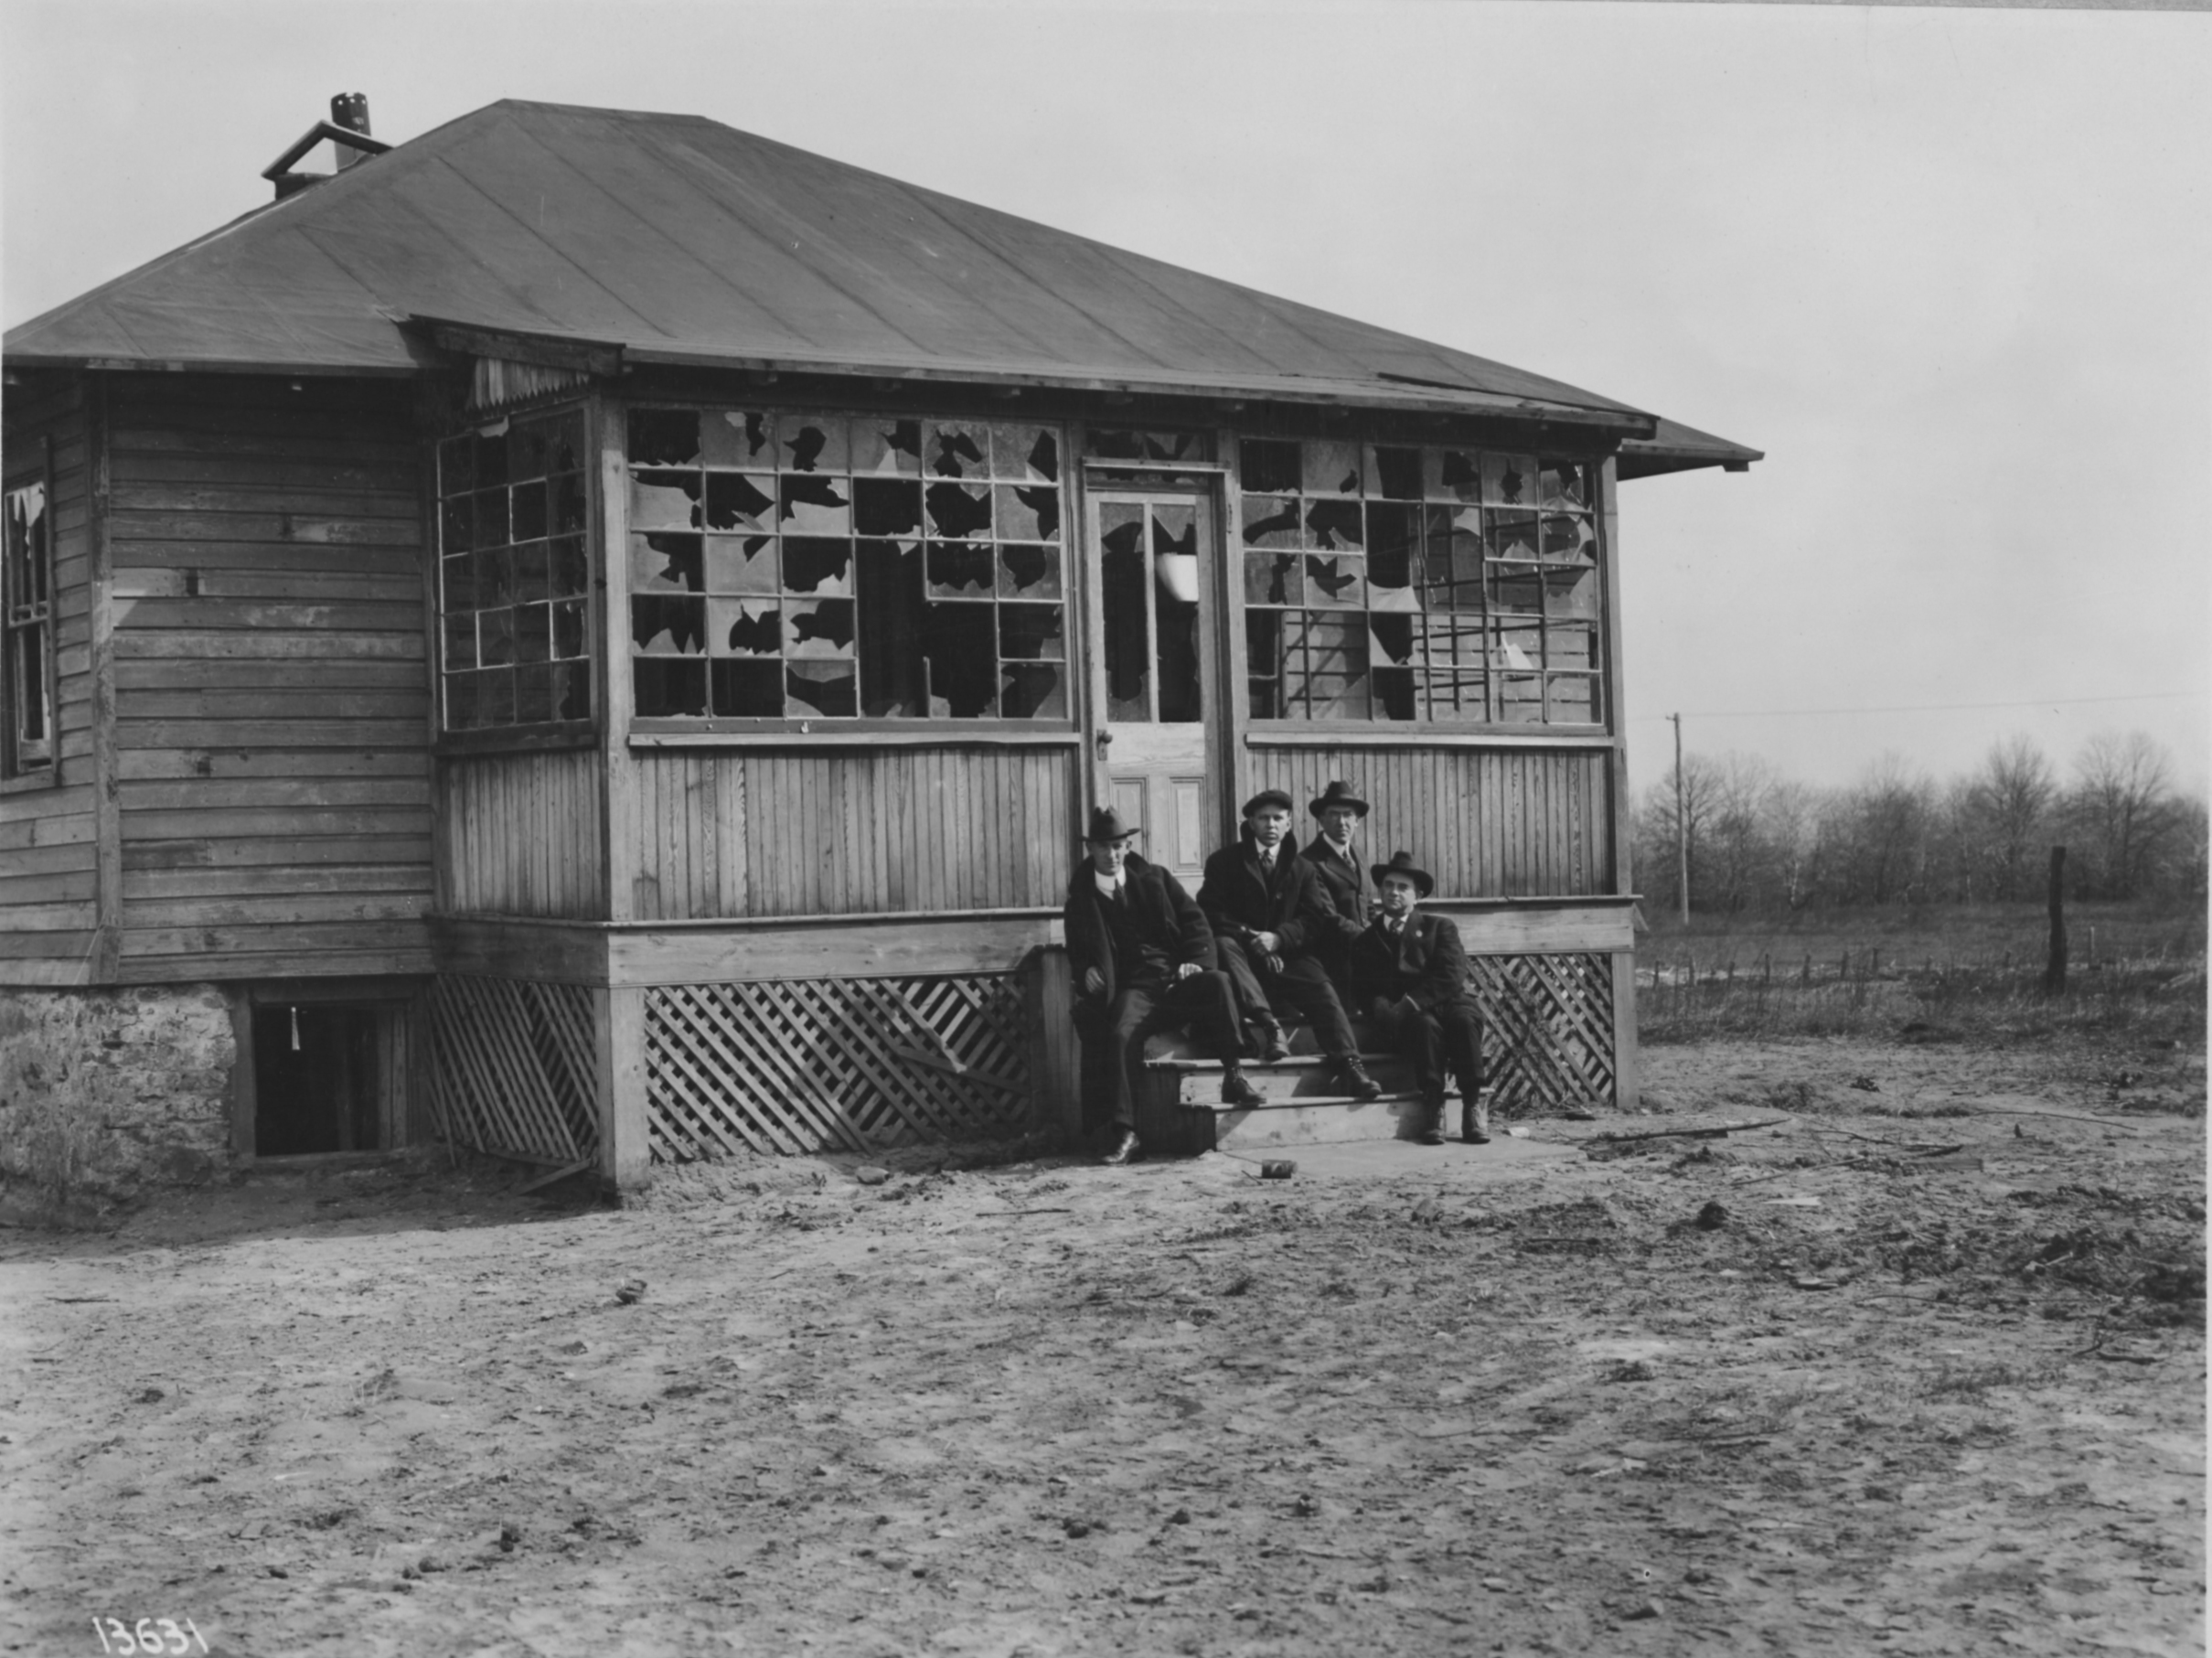 Black and white image of four men in hats and suits seated on the steps of a small building in poor repair.